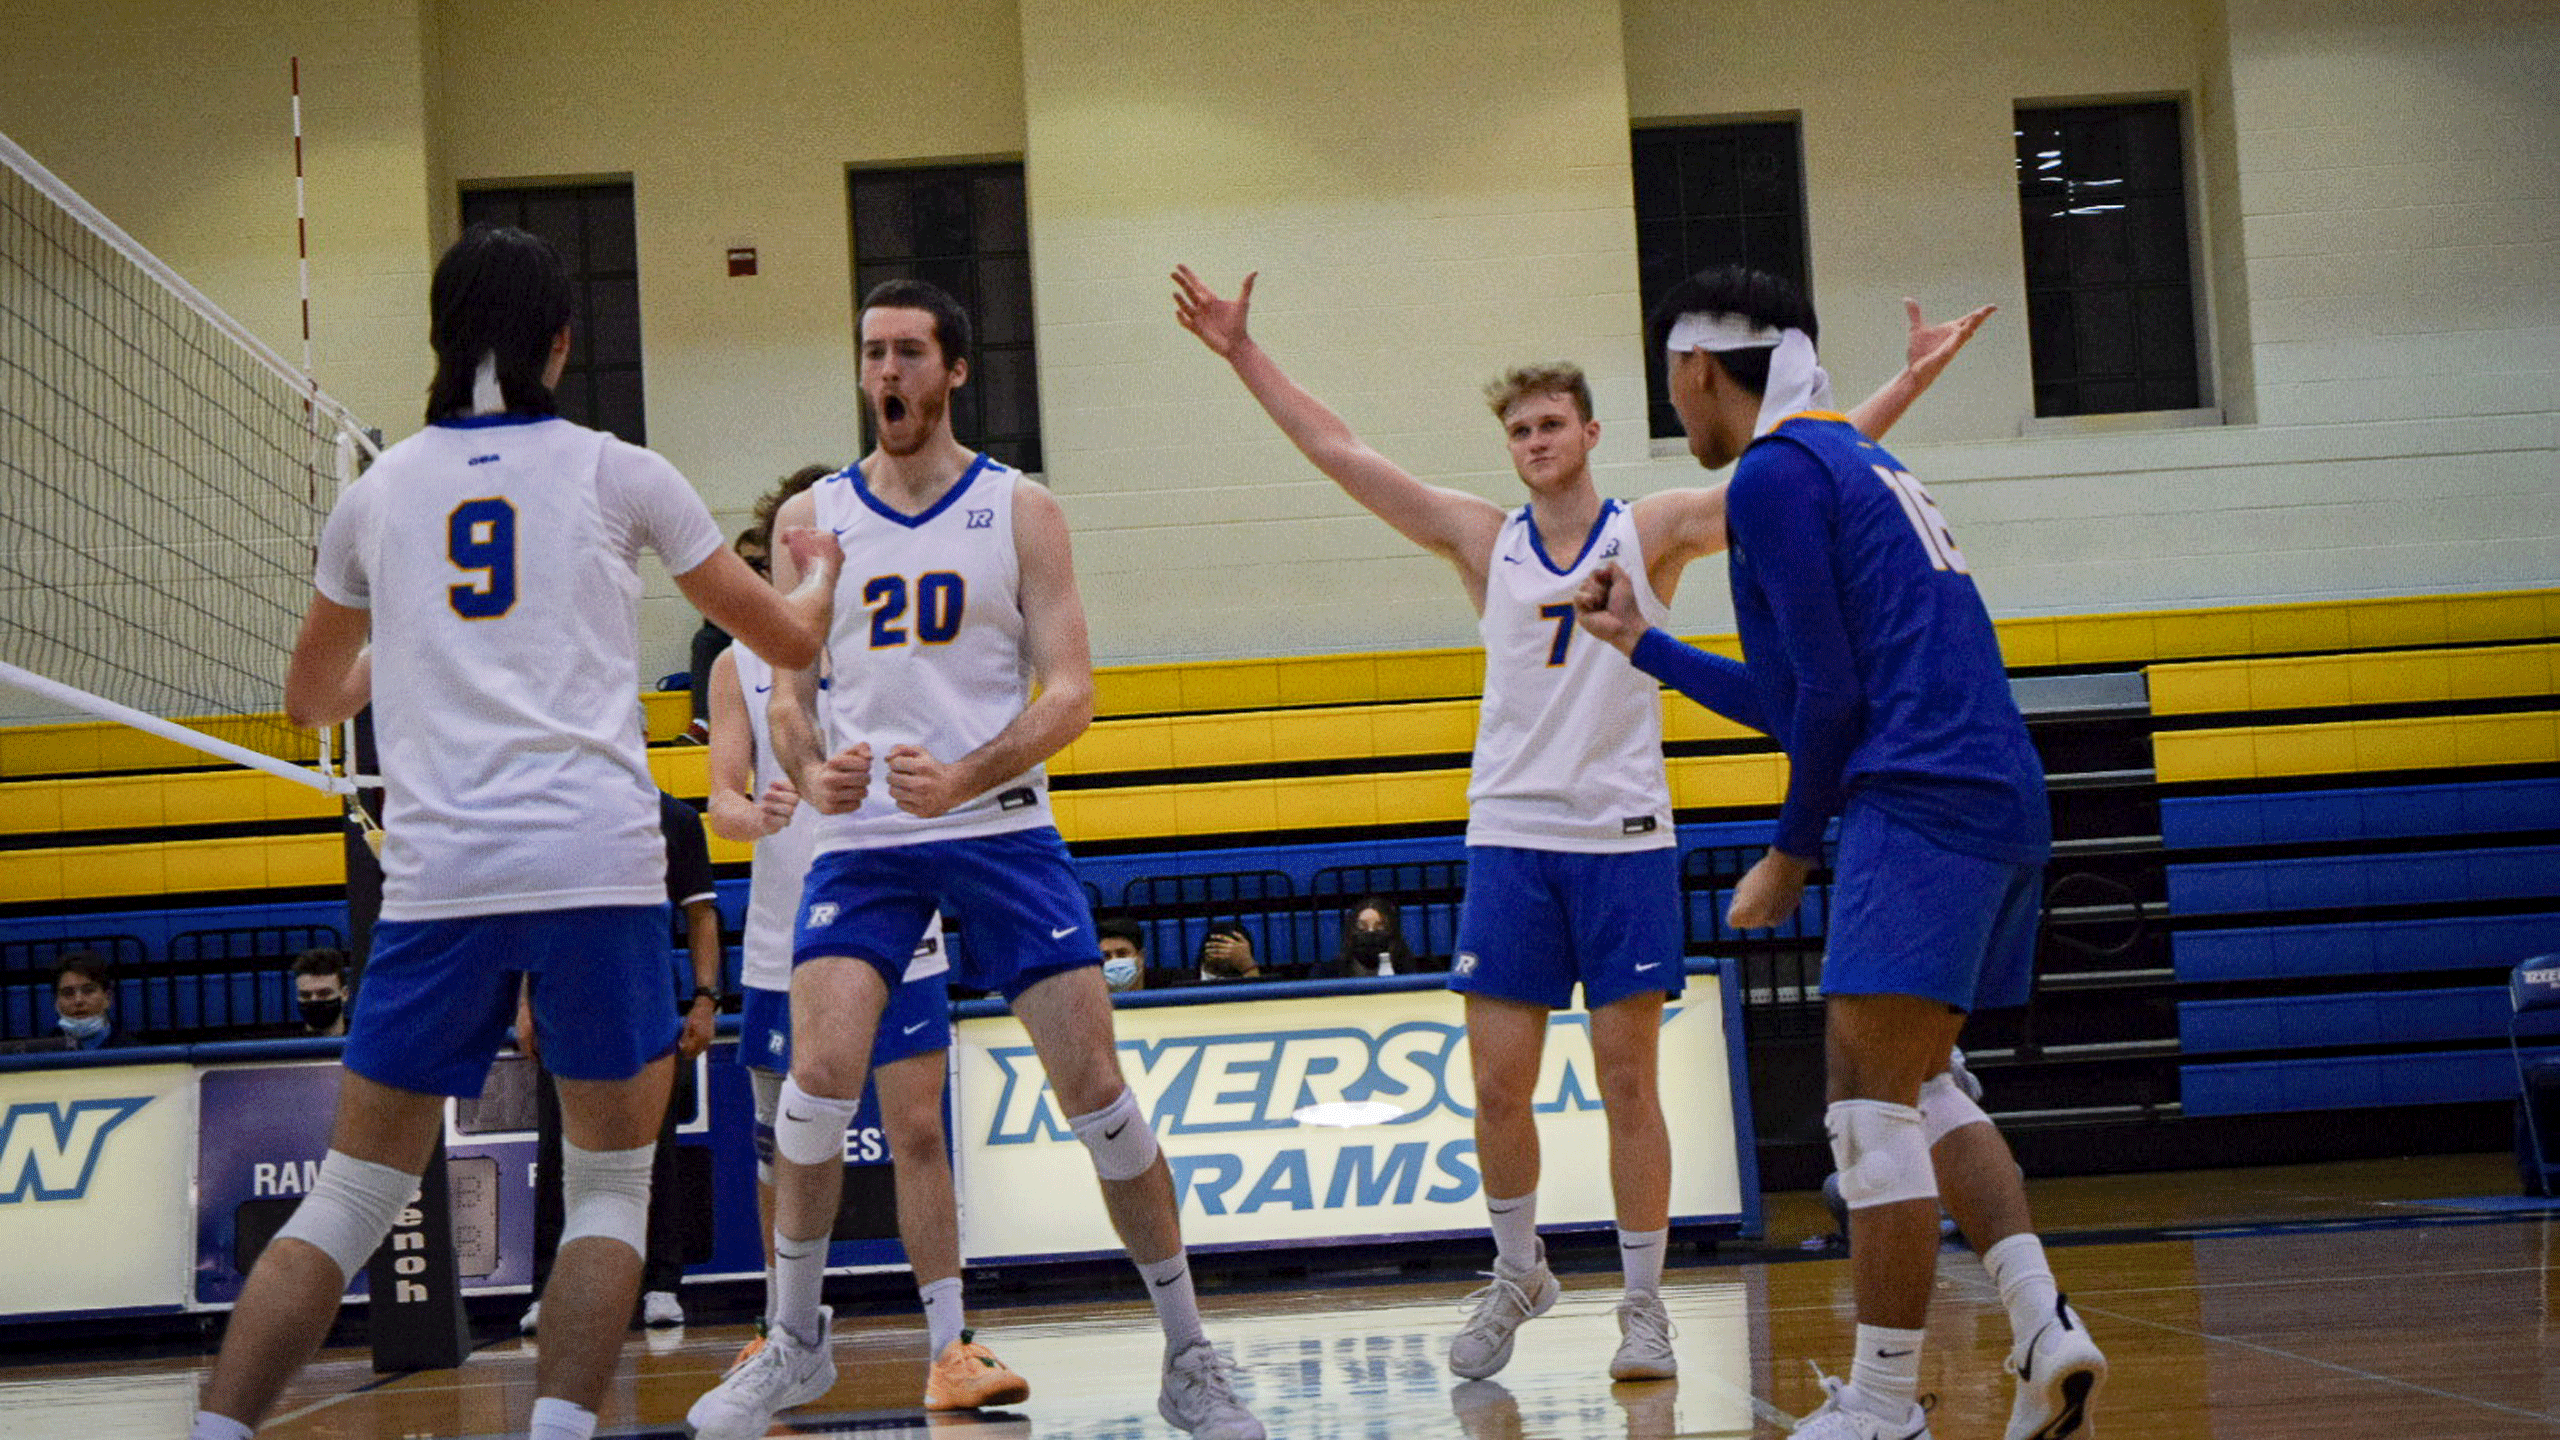 The Rams men's volleyball team in white jerseys celebrate a win